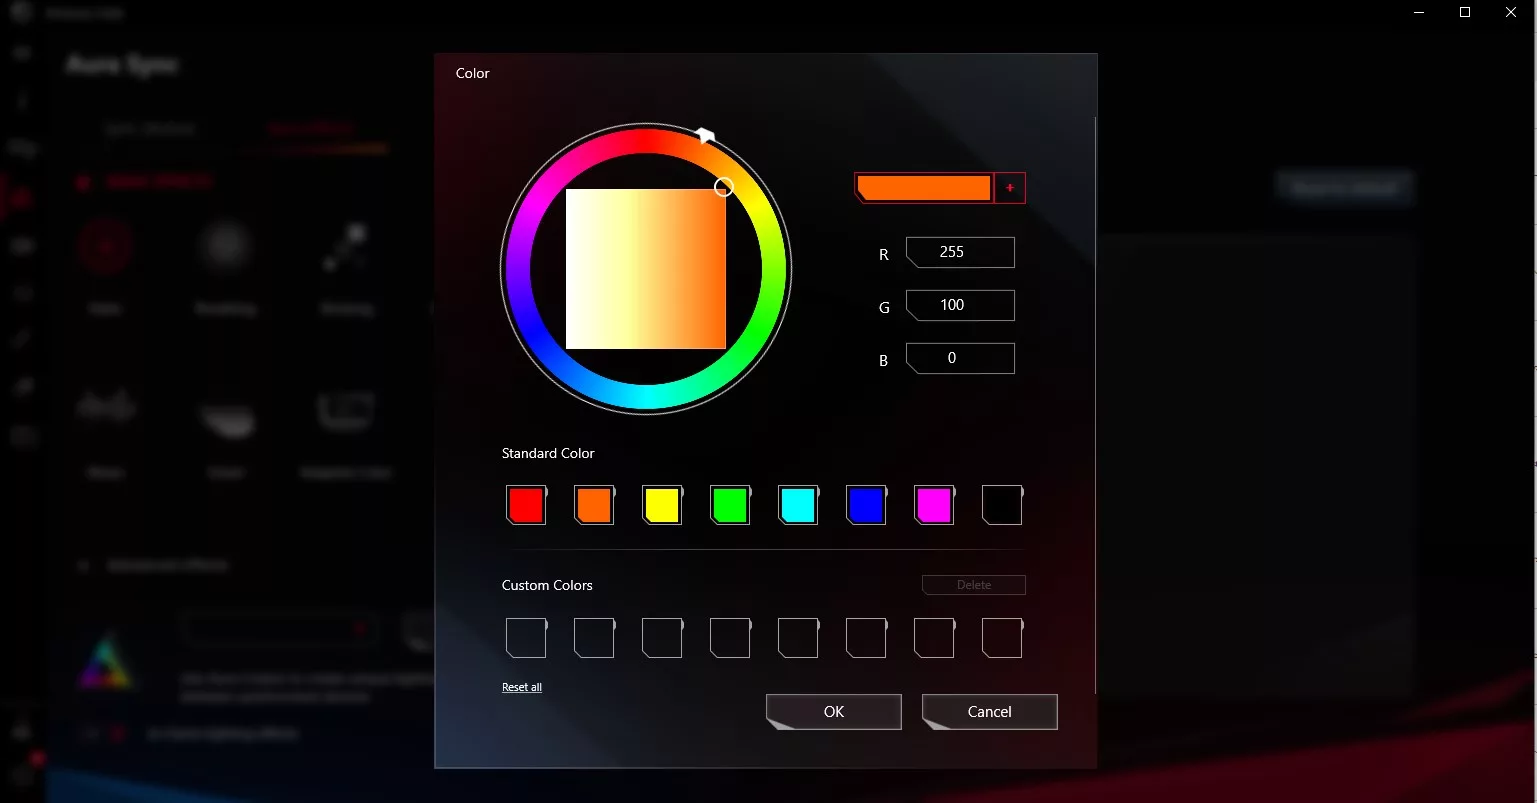 Screenshot of the RGB color selector and color wheel options in the Aura Sync menu.